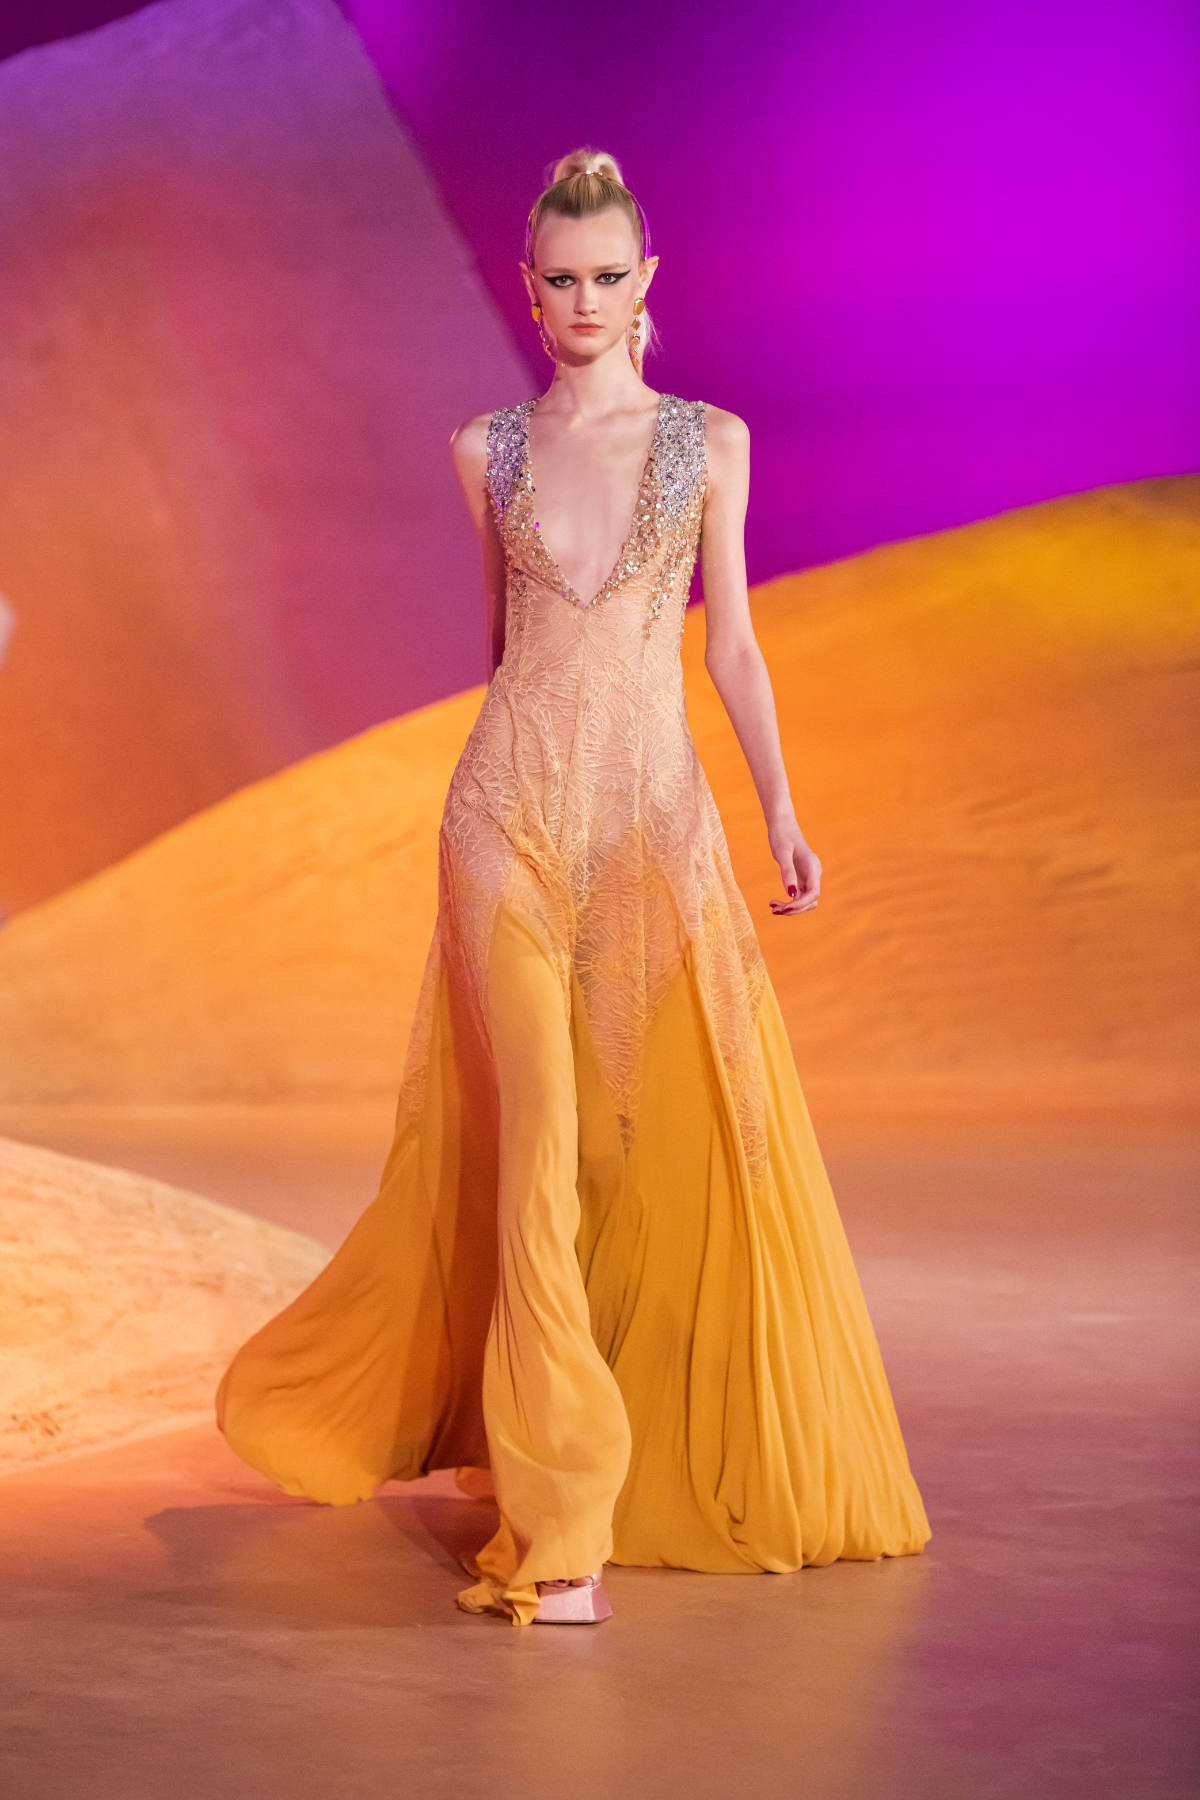 Georges Hobeika Presents Its New Ready To Wear Fall / Winter 2023 Collection: A Martian Breeze